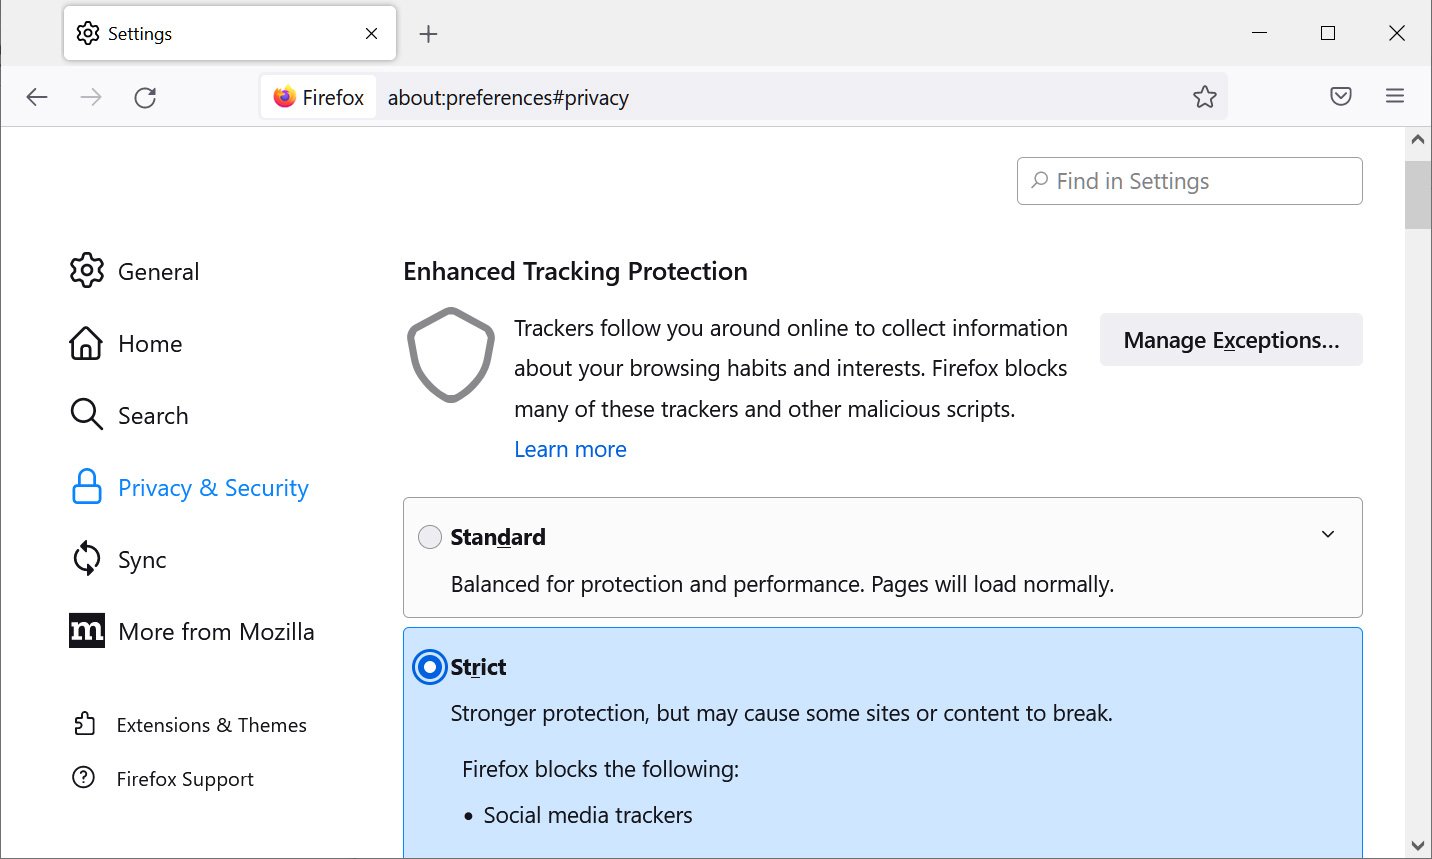 Mozilla Firefox's Enhanced Tracking Protection set to Strict